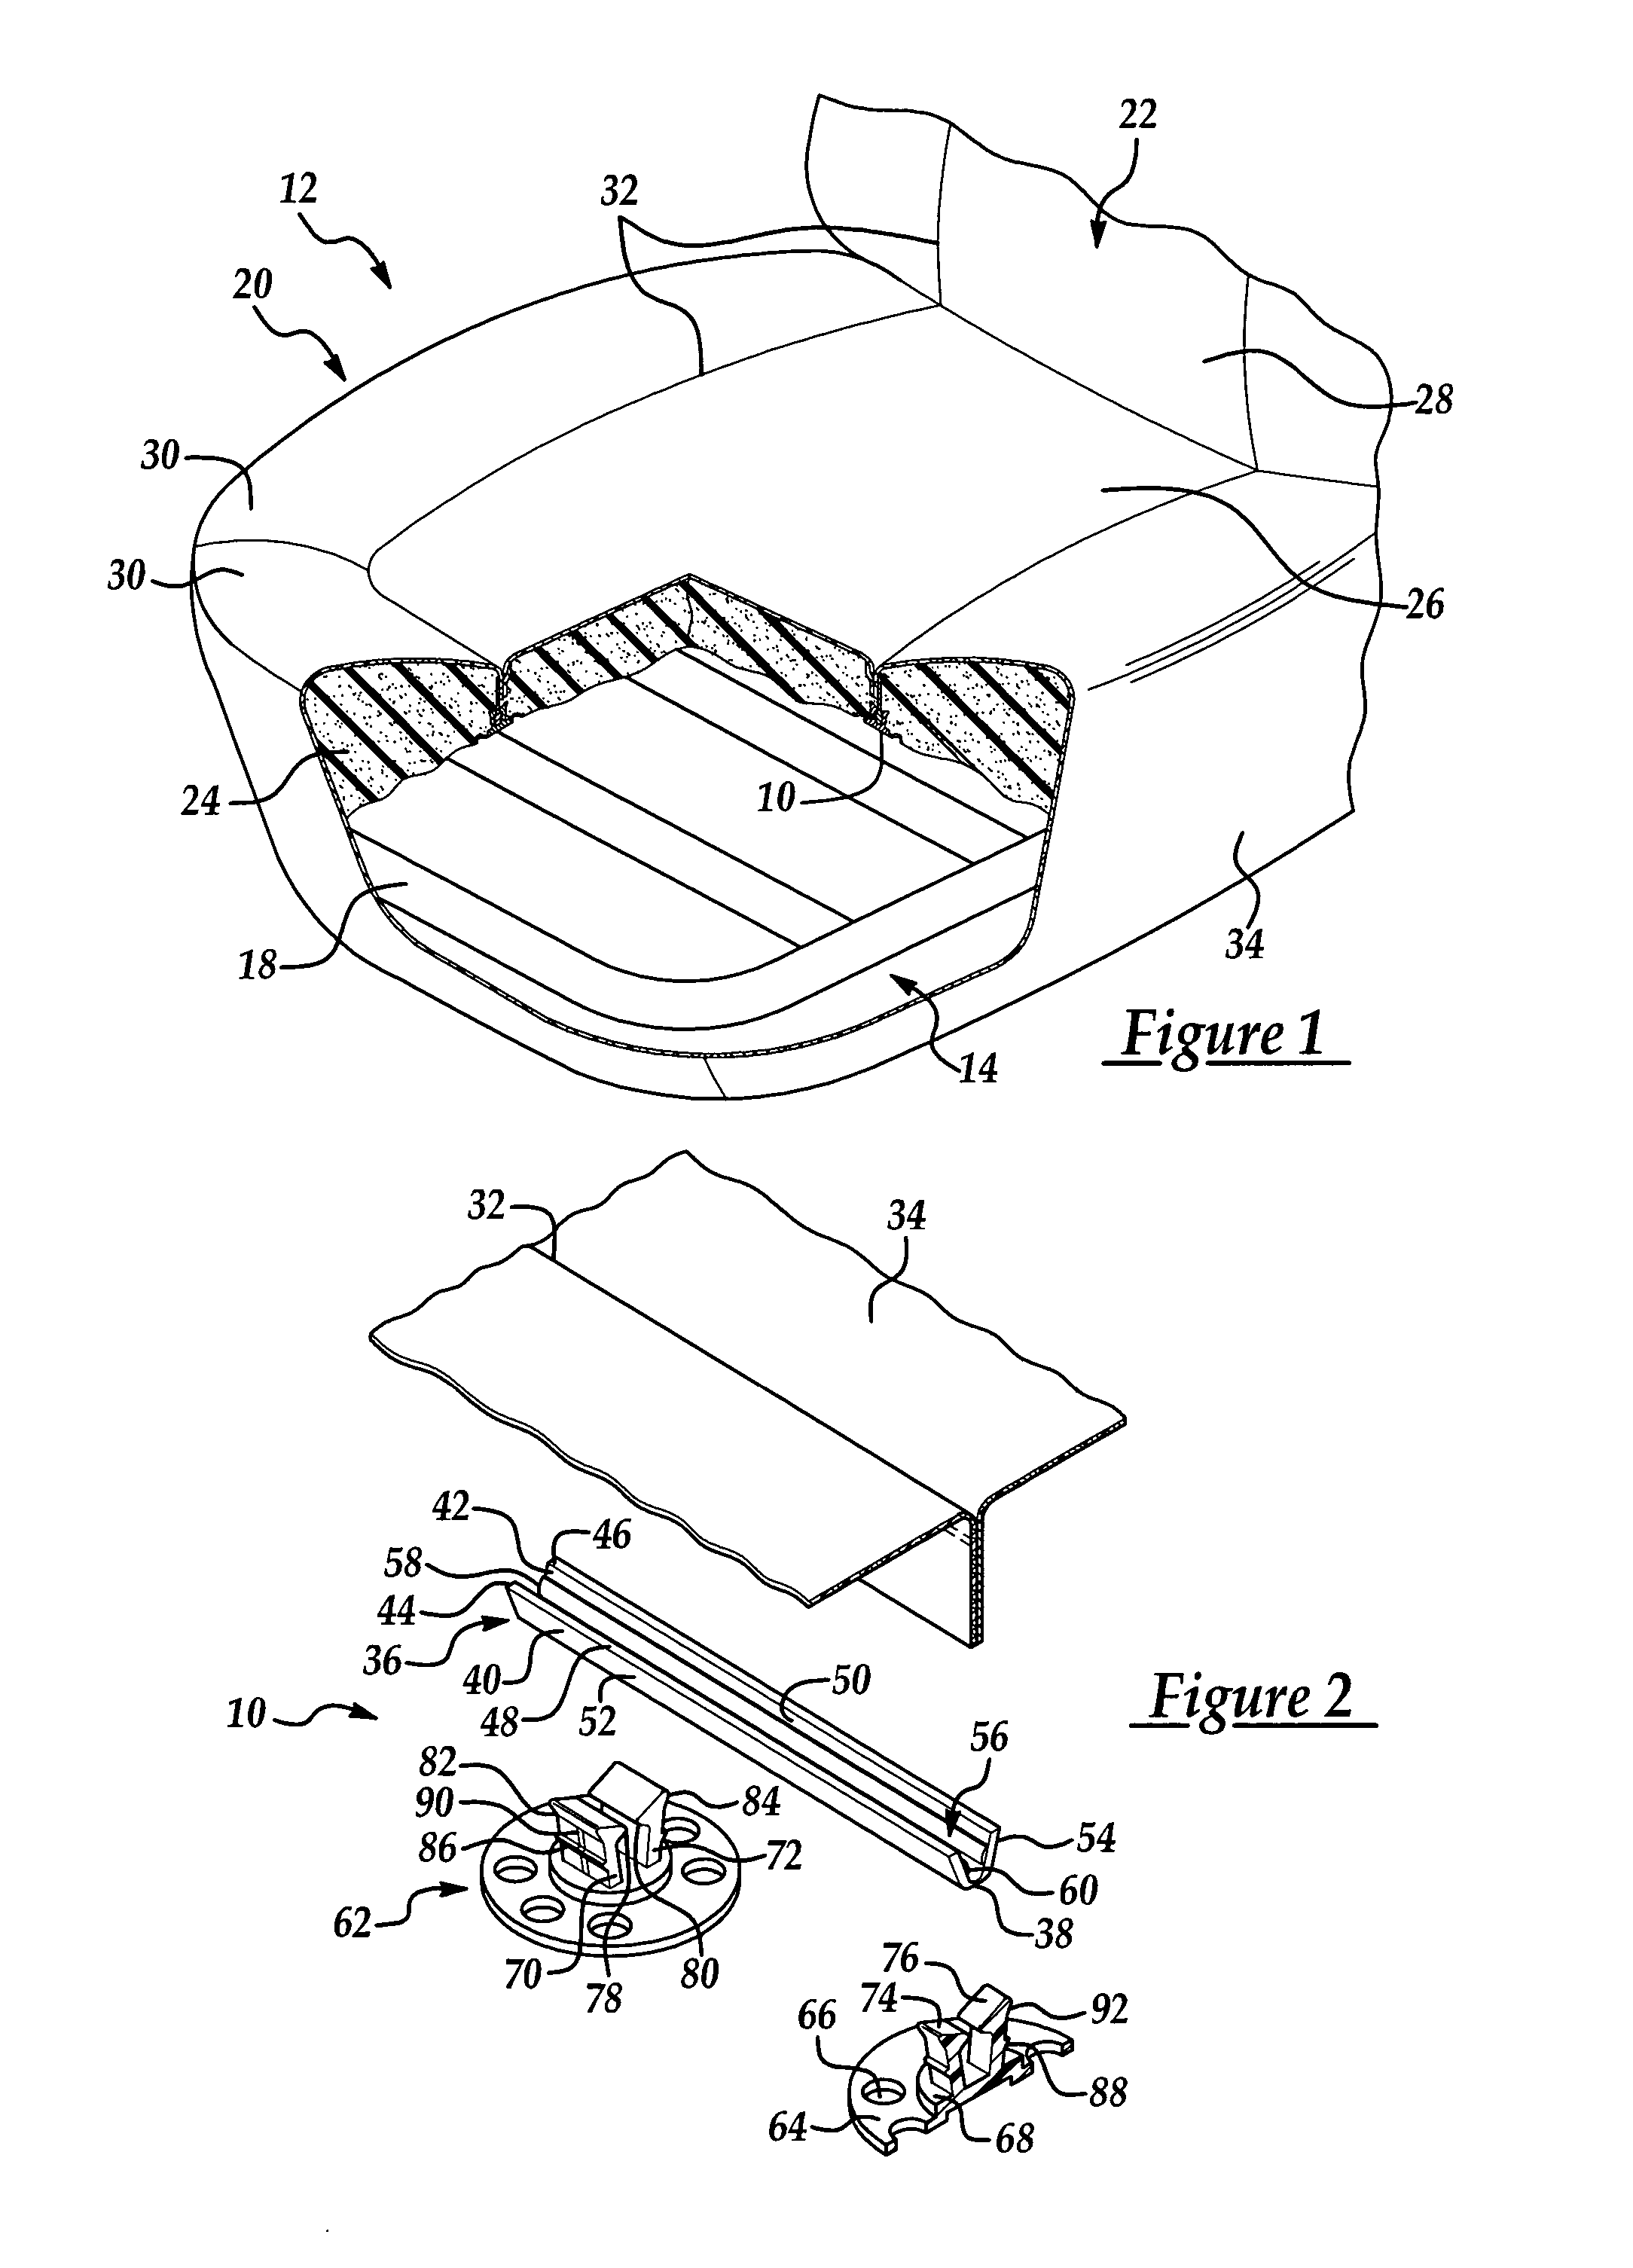 Attachment assembly for securing trim material to the padding of a vehicle seat